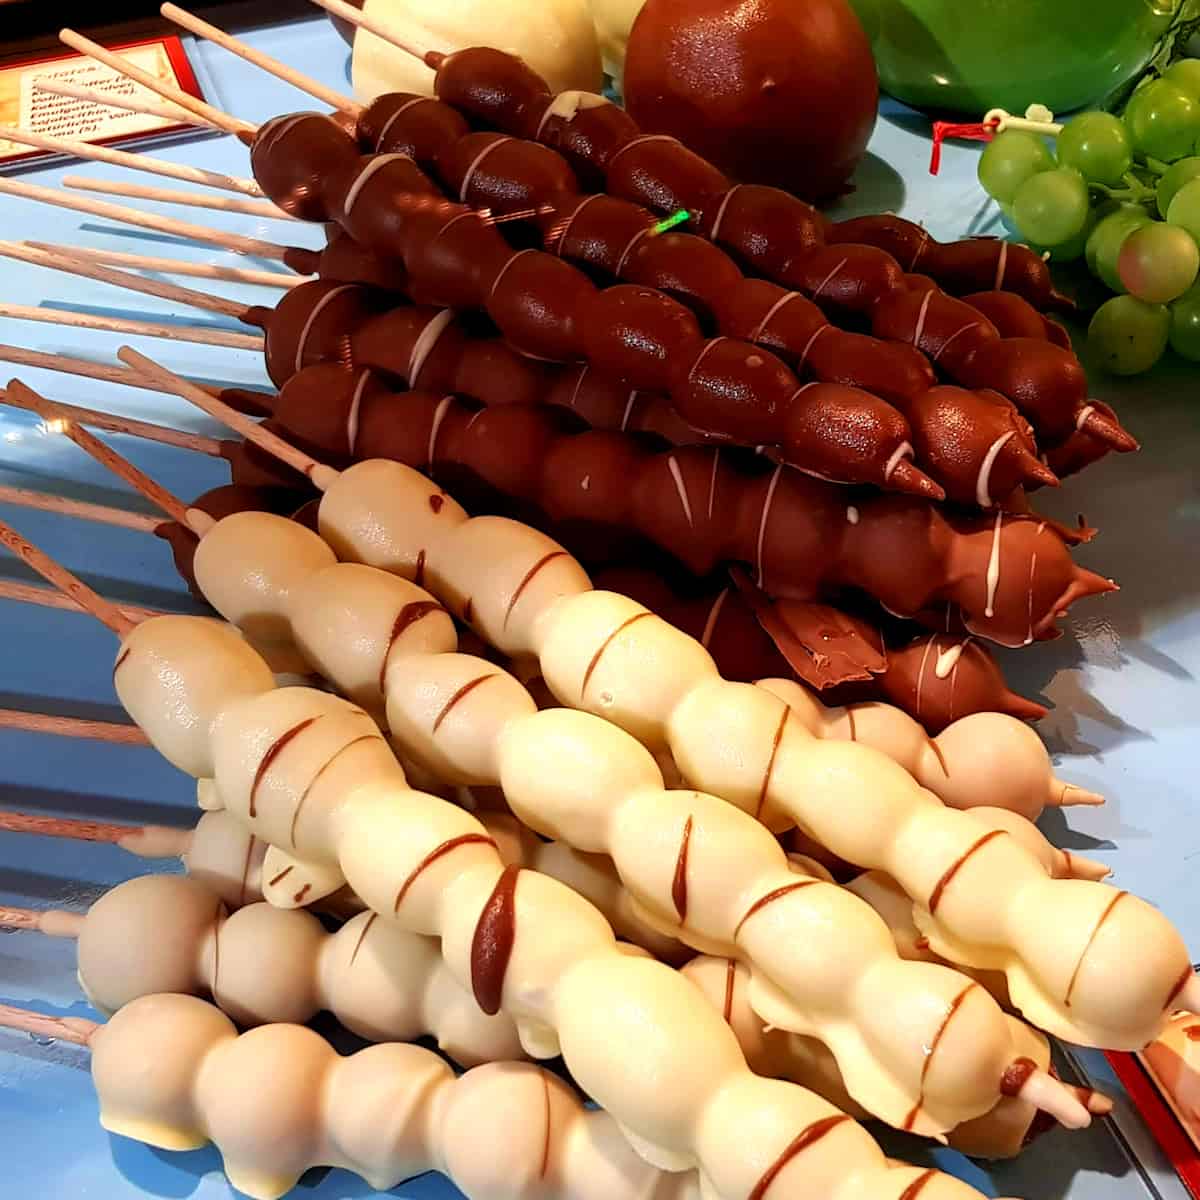 Chocolate Covered Fruits at a German Christmas Highlight